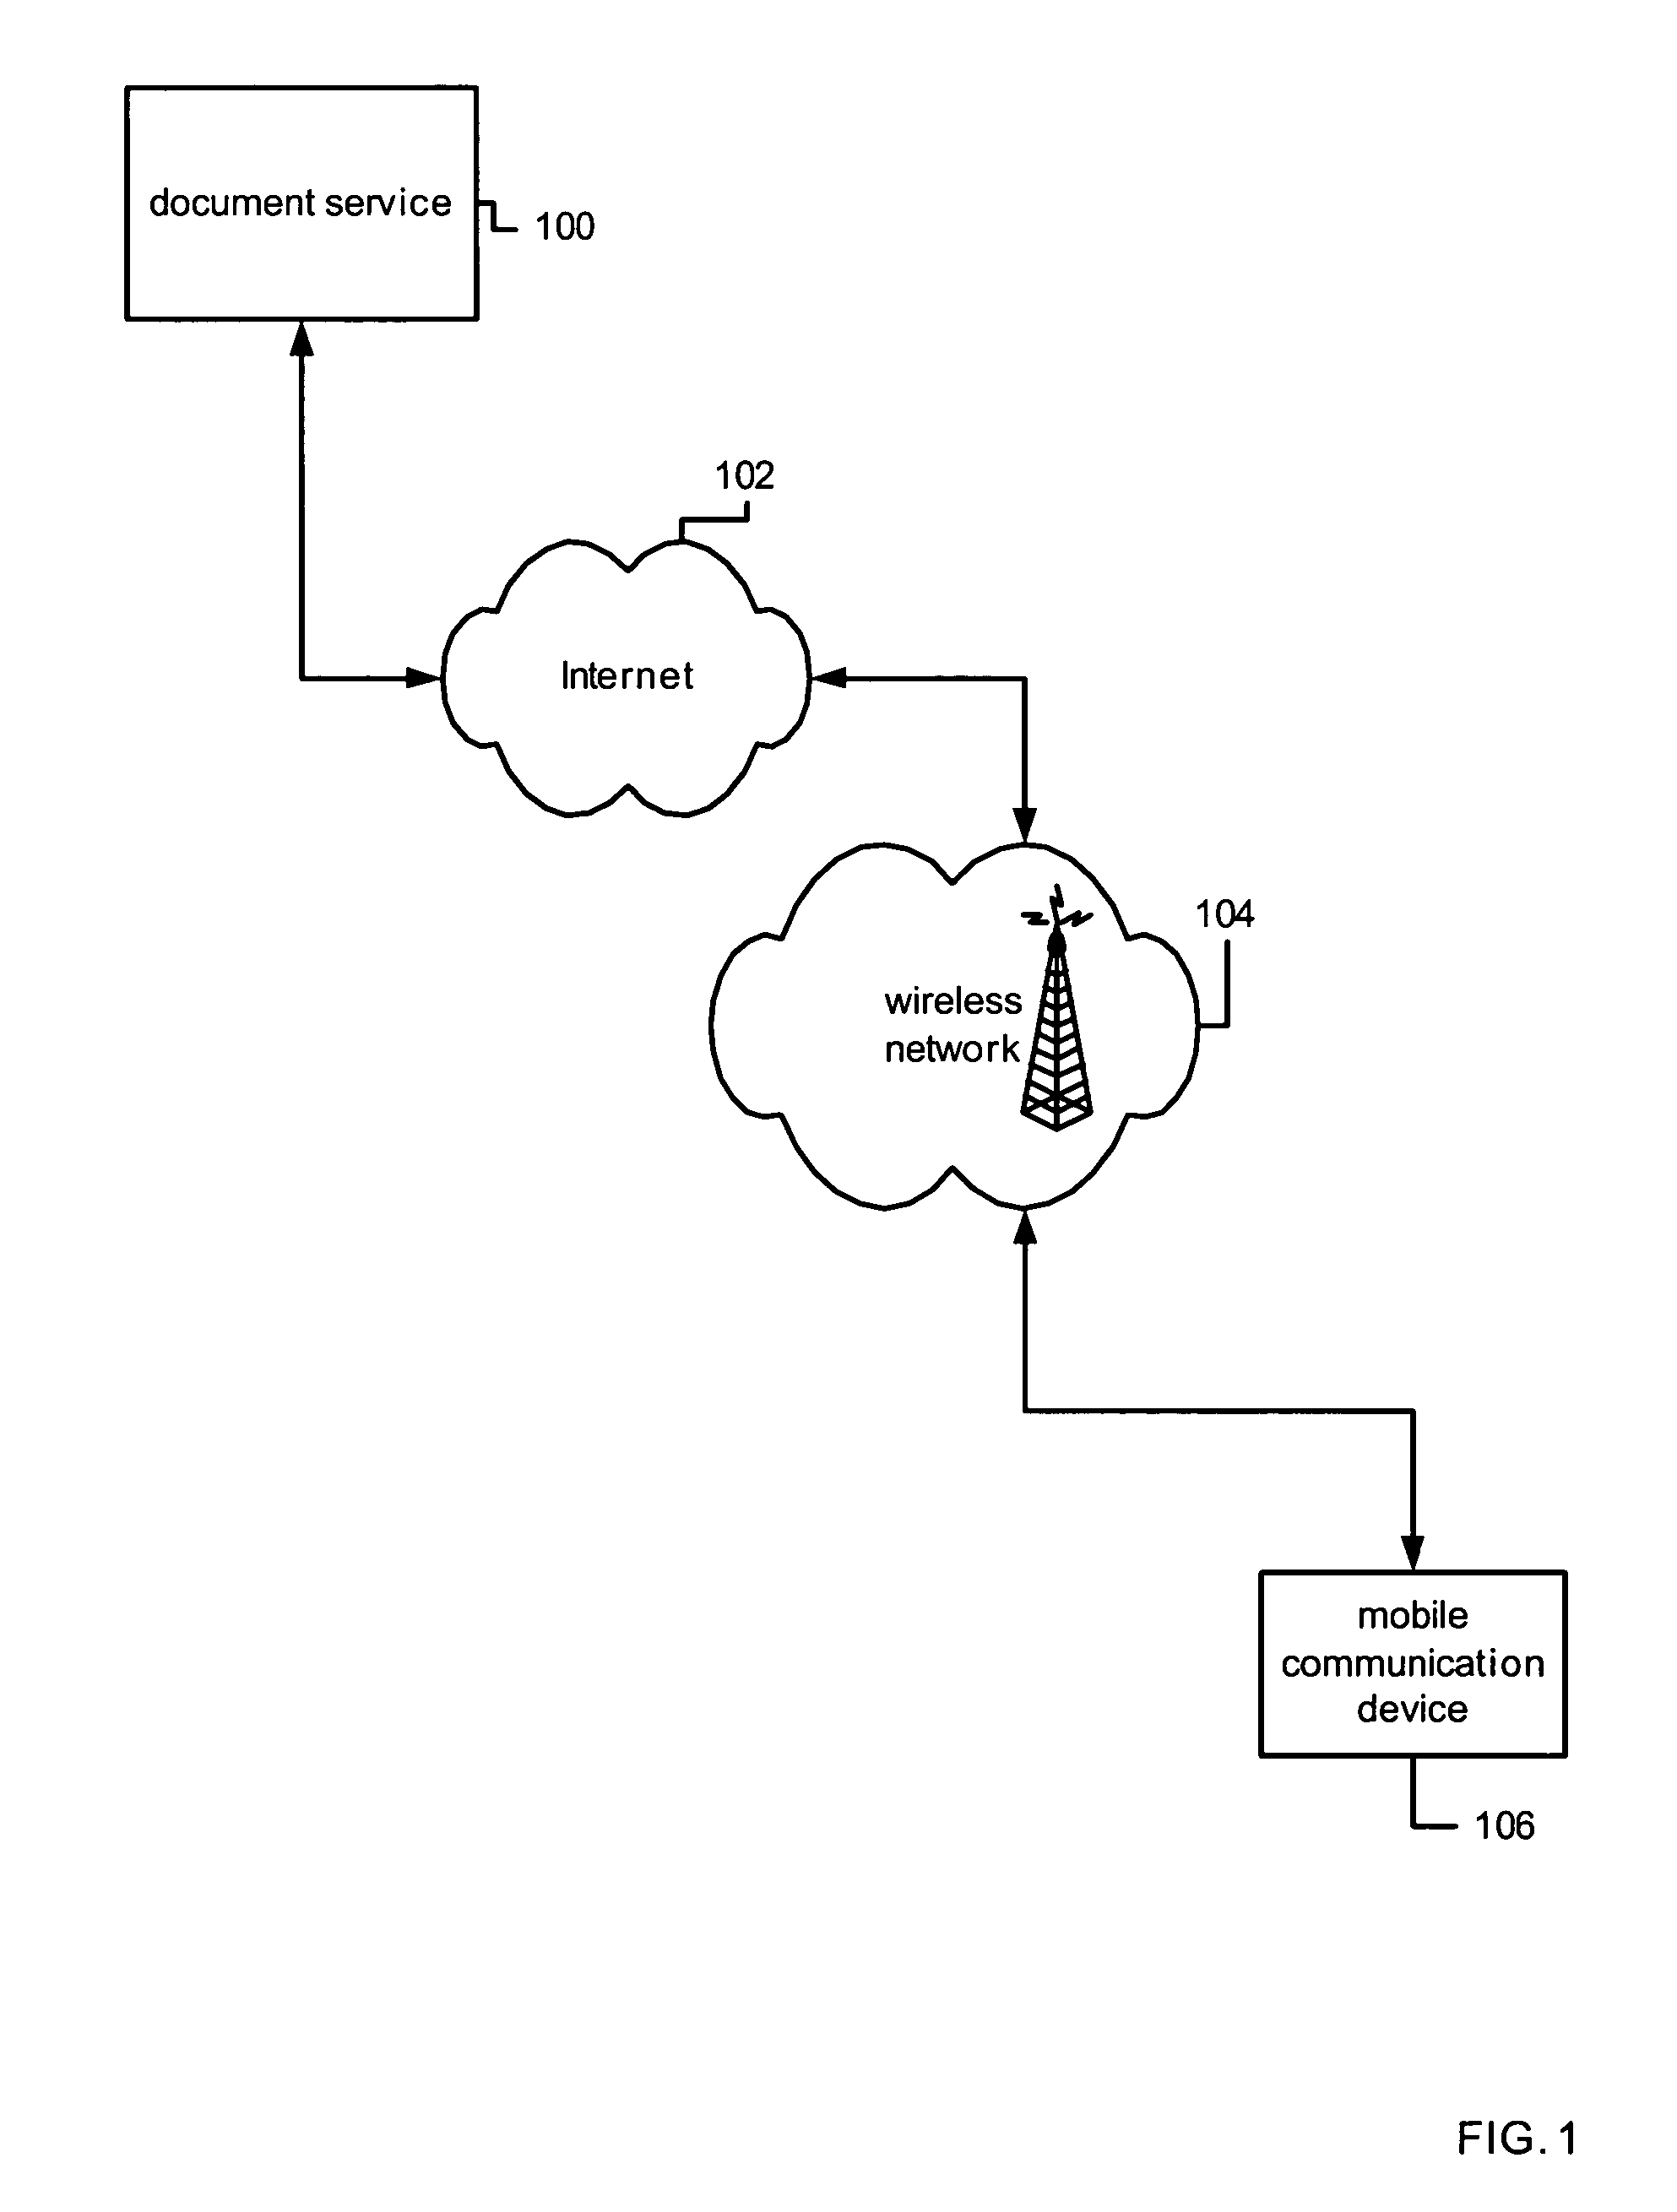 Methods and apparatus for summarizing document content for mobile communication devices